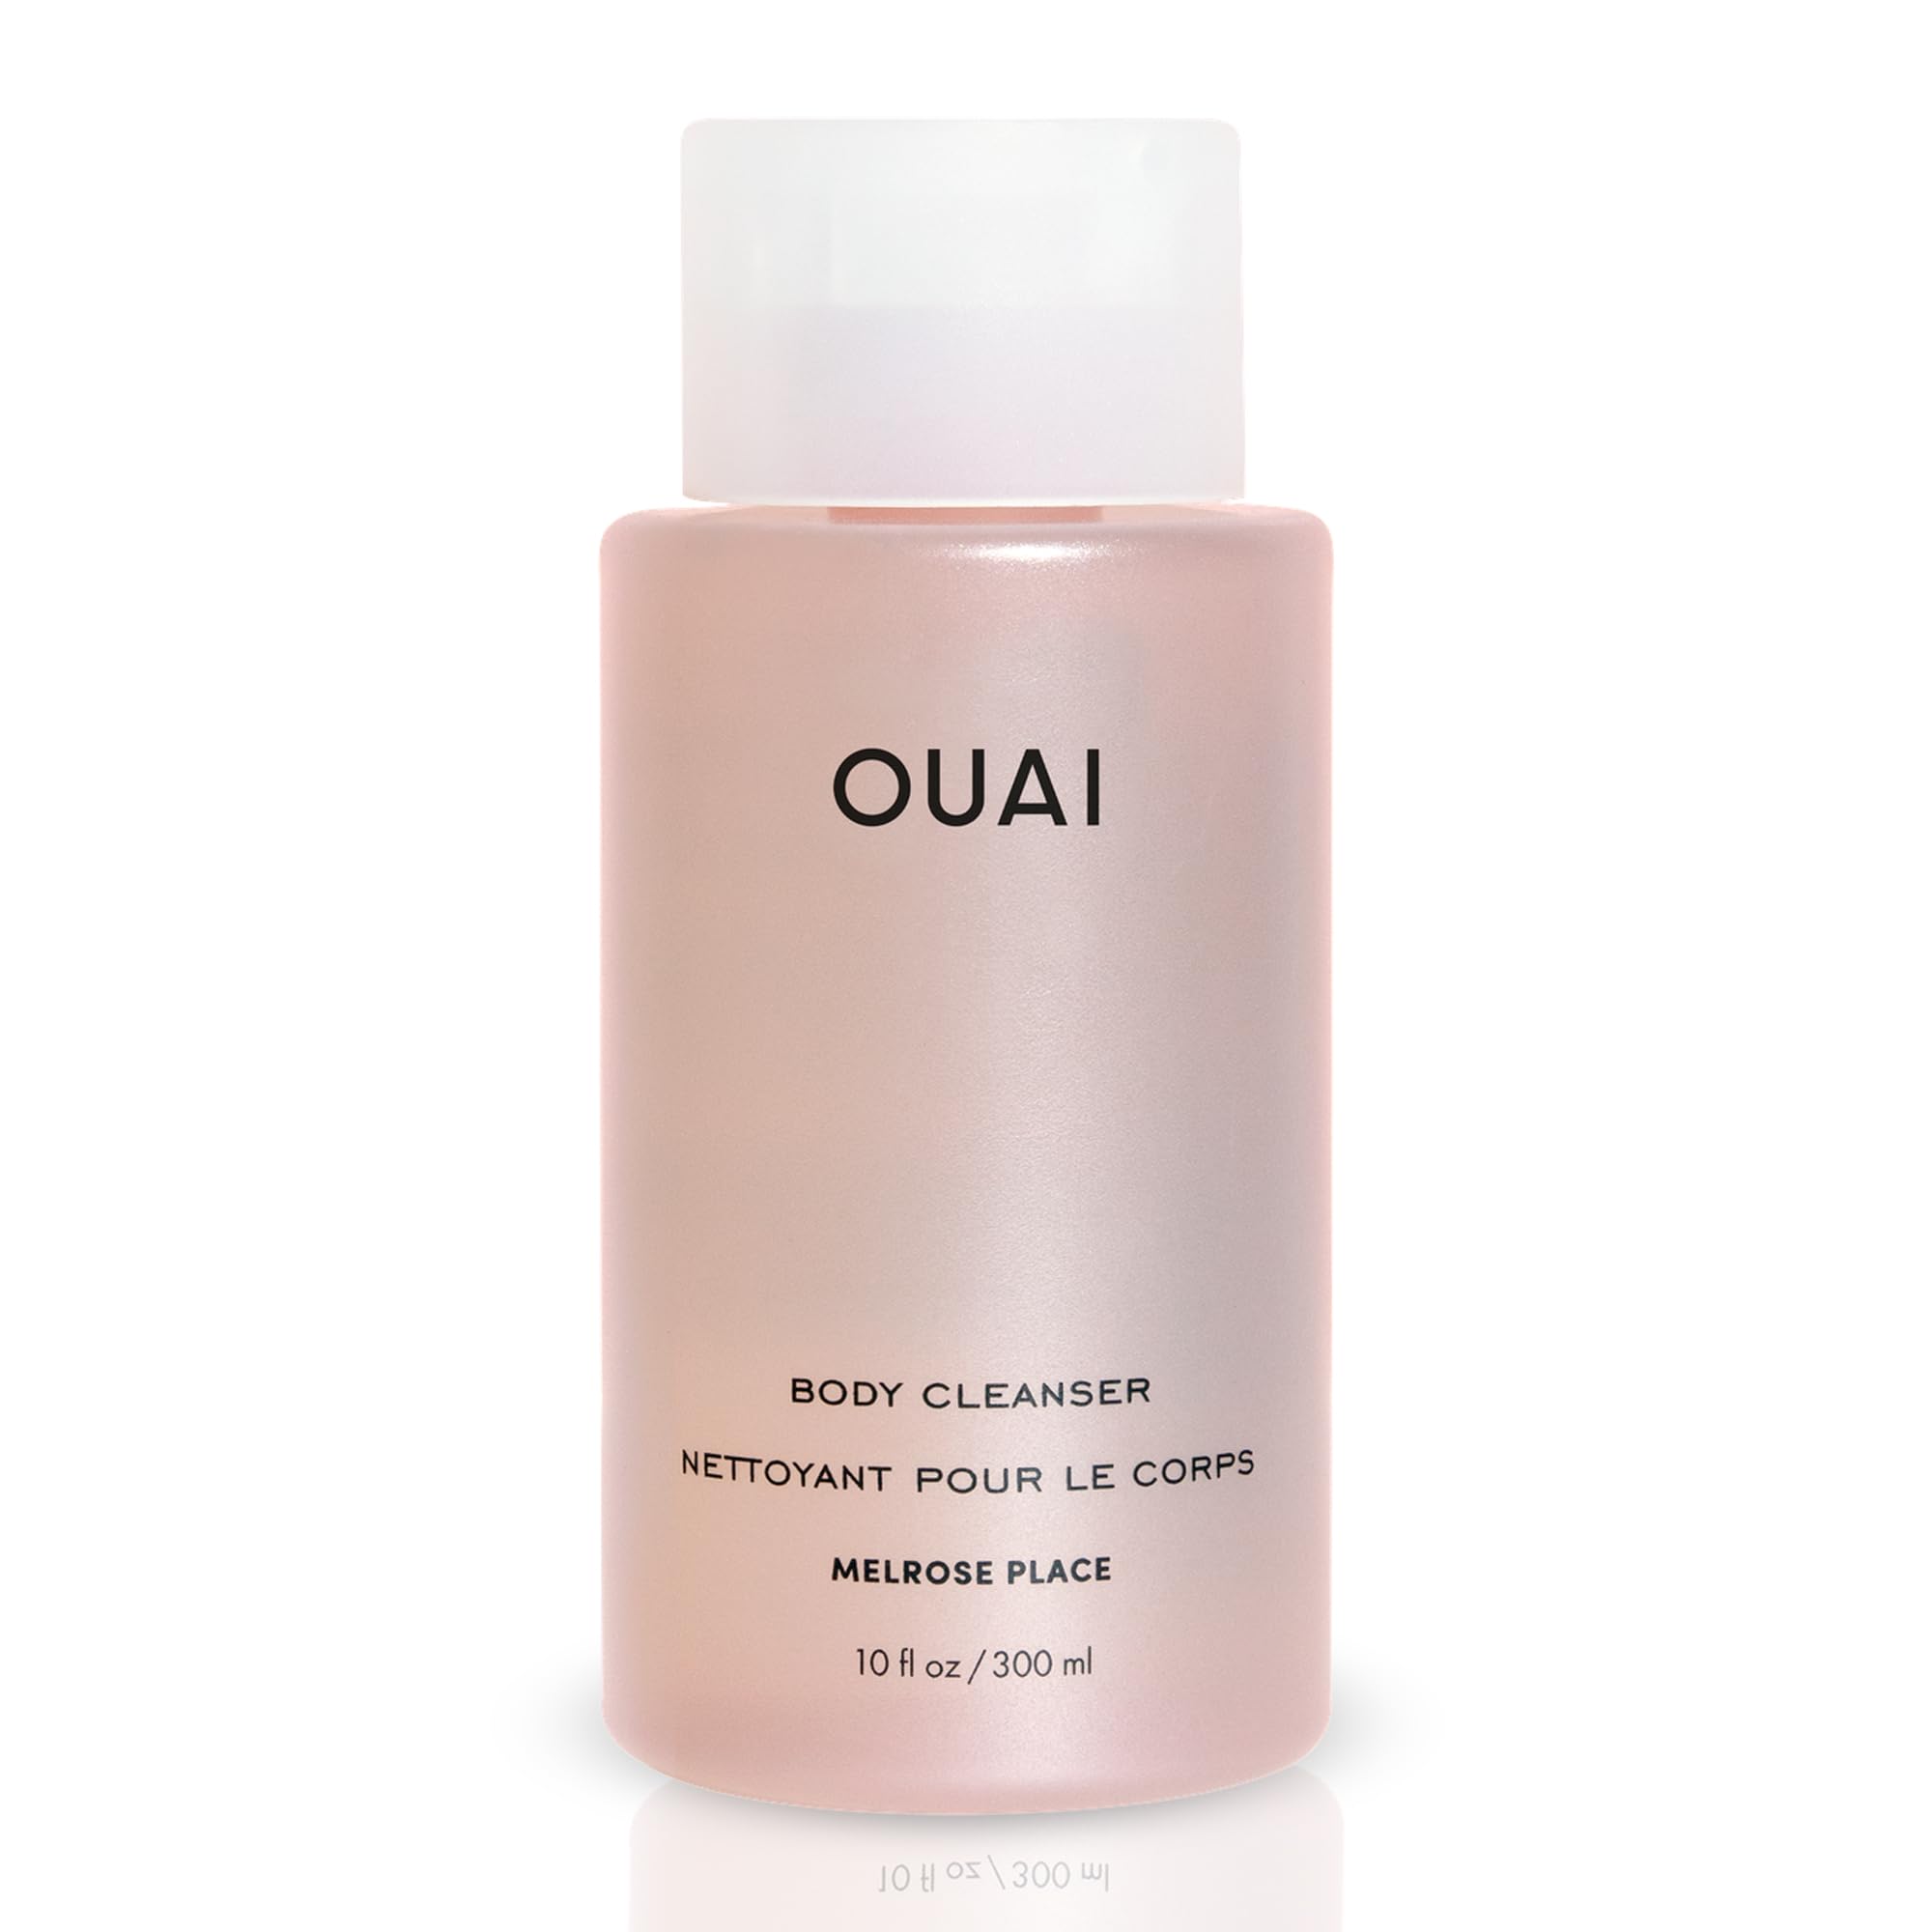 OUAI Body Cleanser, Melrose Place - Nurture, Balance & Soften Skin - Hydrates with Jojoba Seed & Rose Hip Oil - Free of Parabens, Sulfates SLS and SLES & Phthalates - 10 fl oz